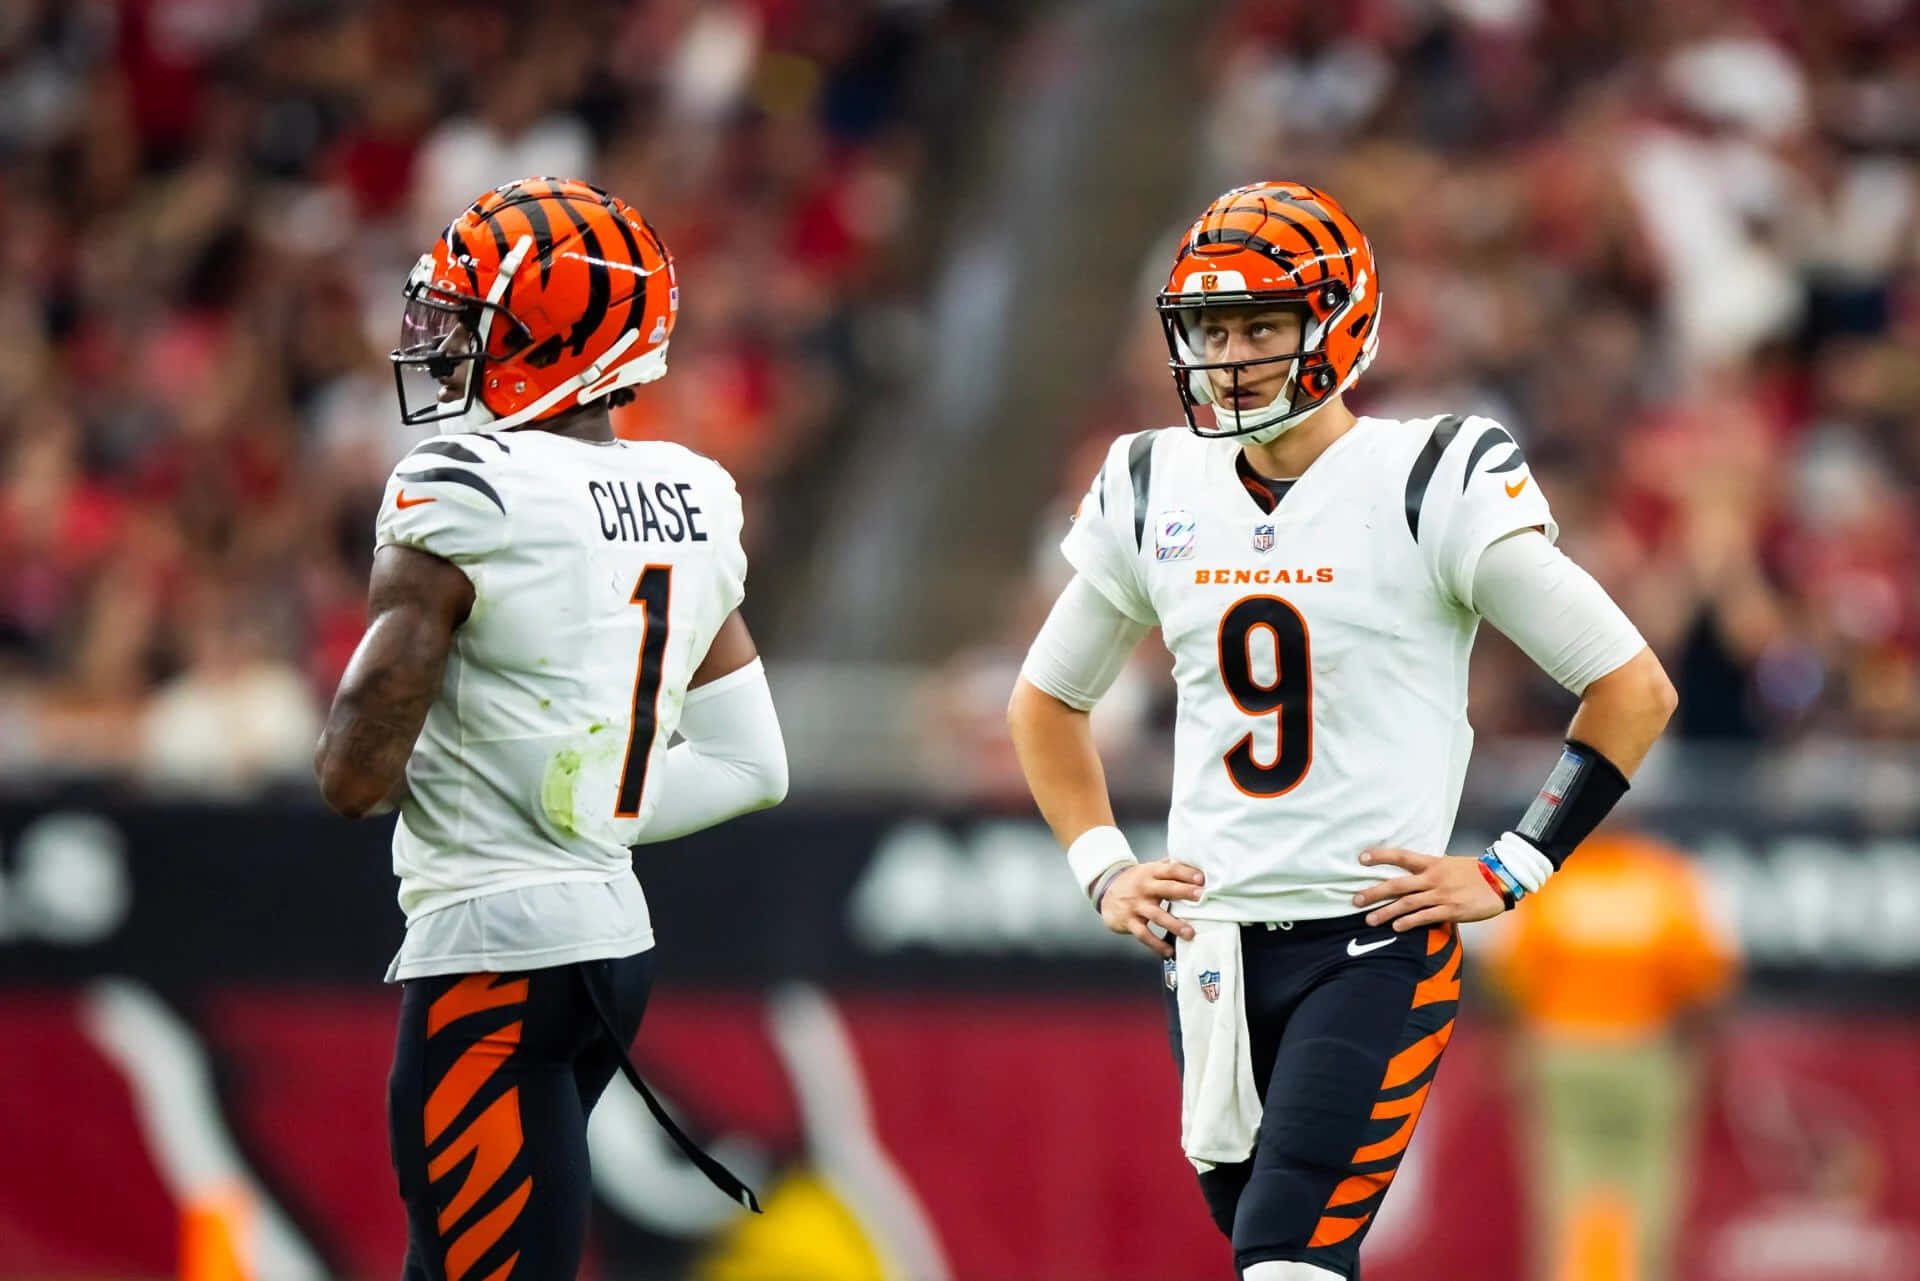 Joe Burrow Jamarr Chase Bengals Game Discussion Wallpaper